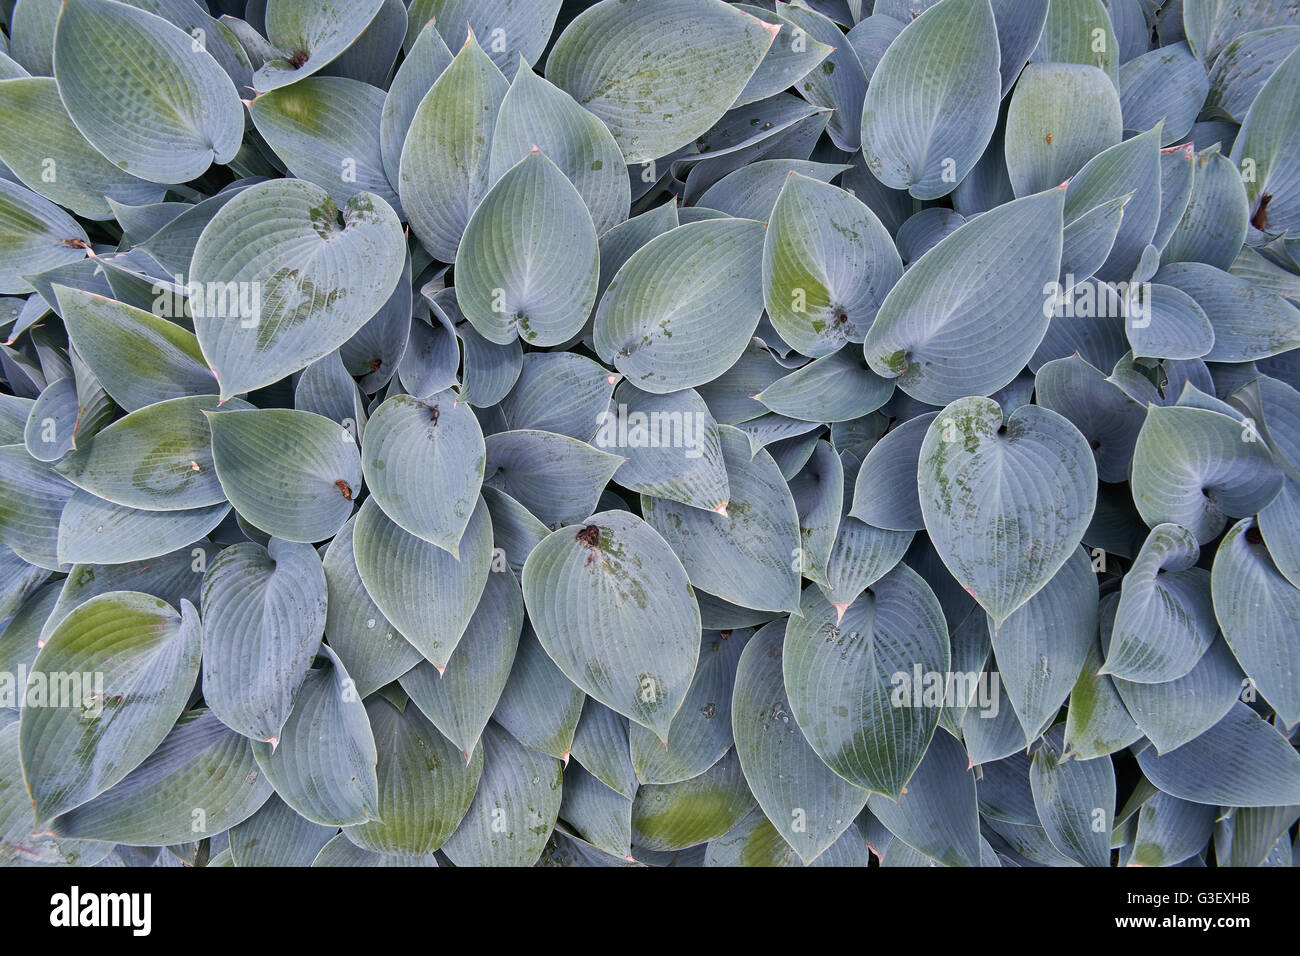 Hosta plantain lily multiple leaves Stock Photo